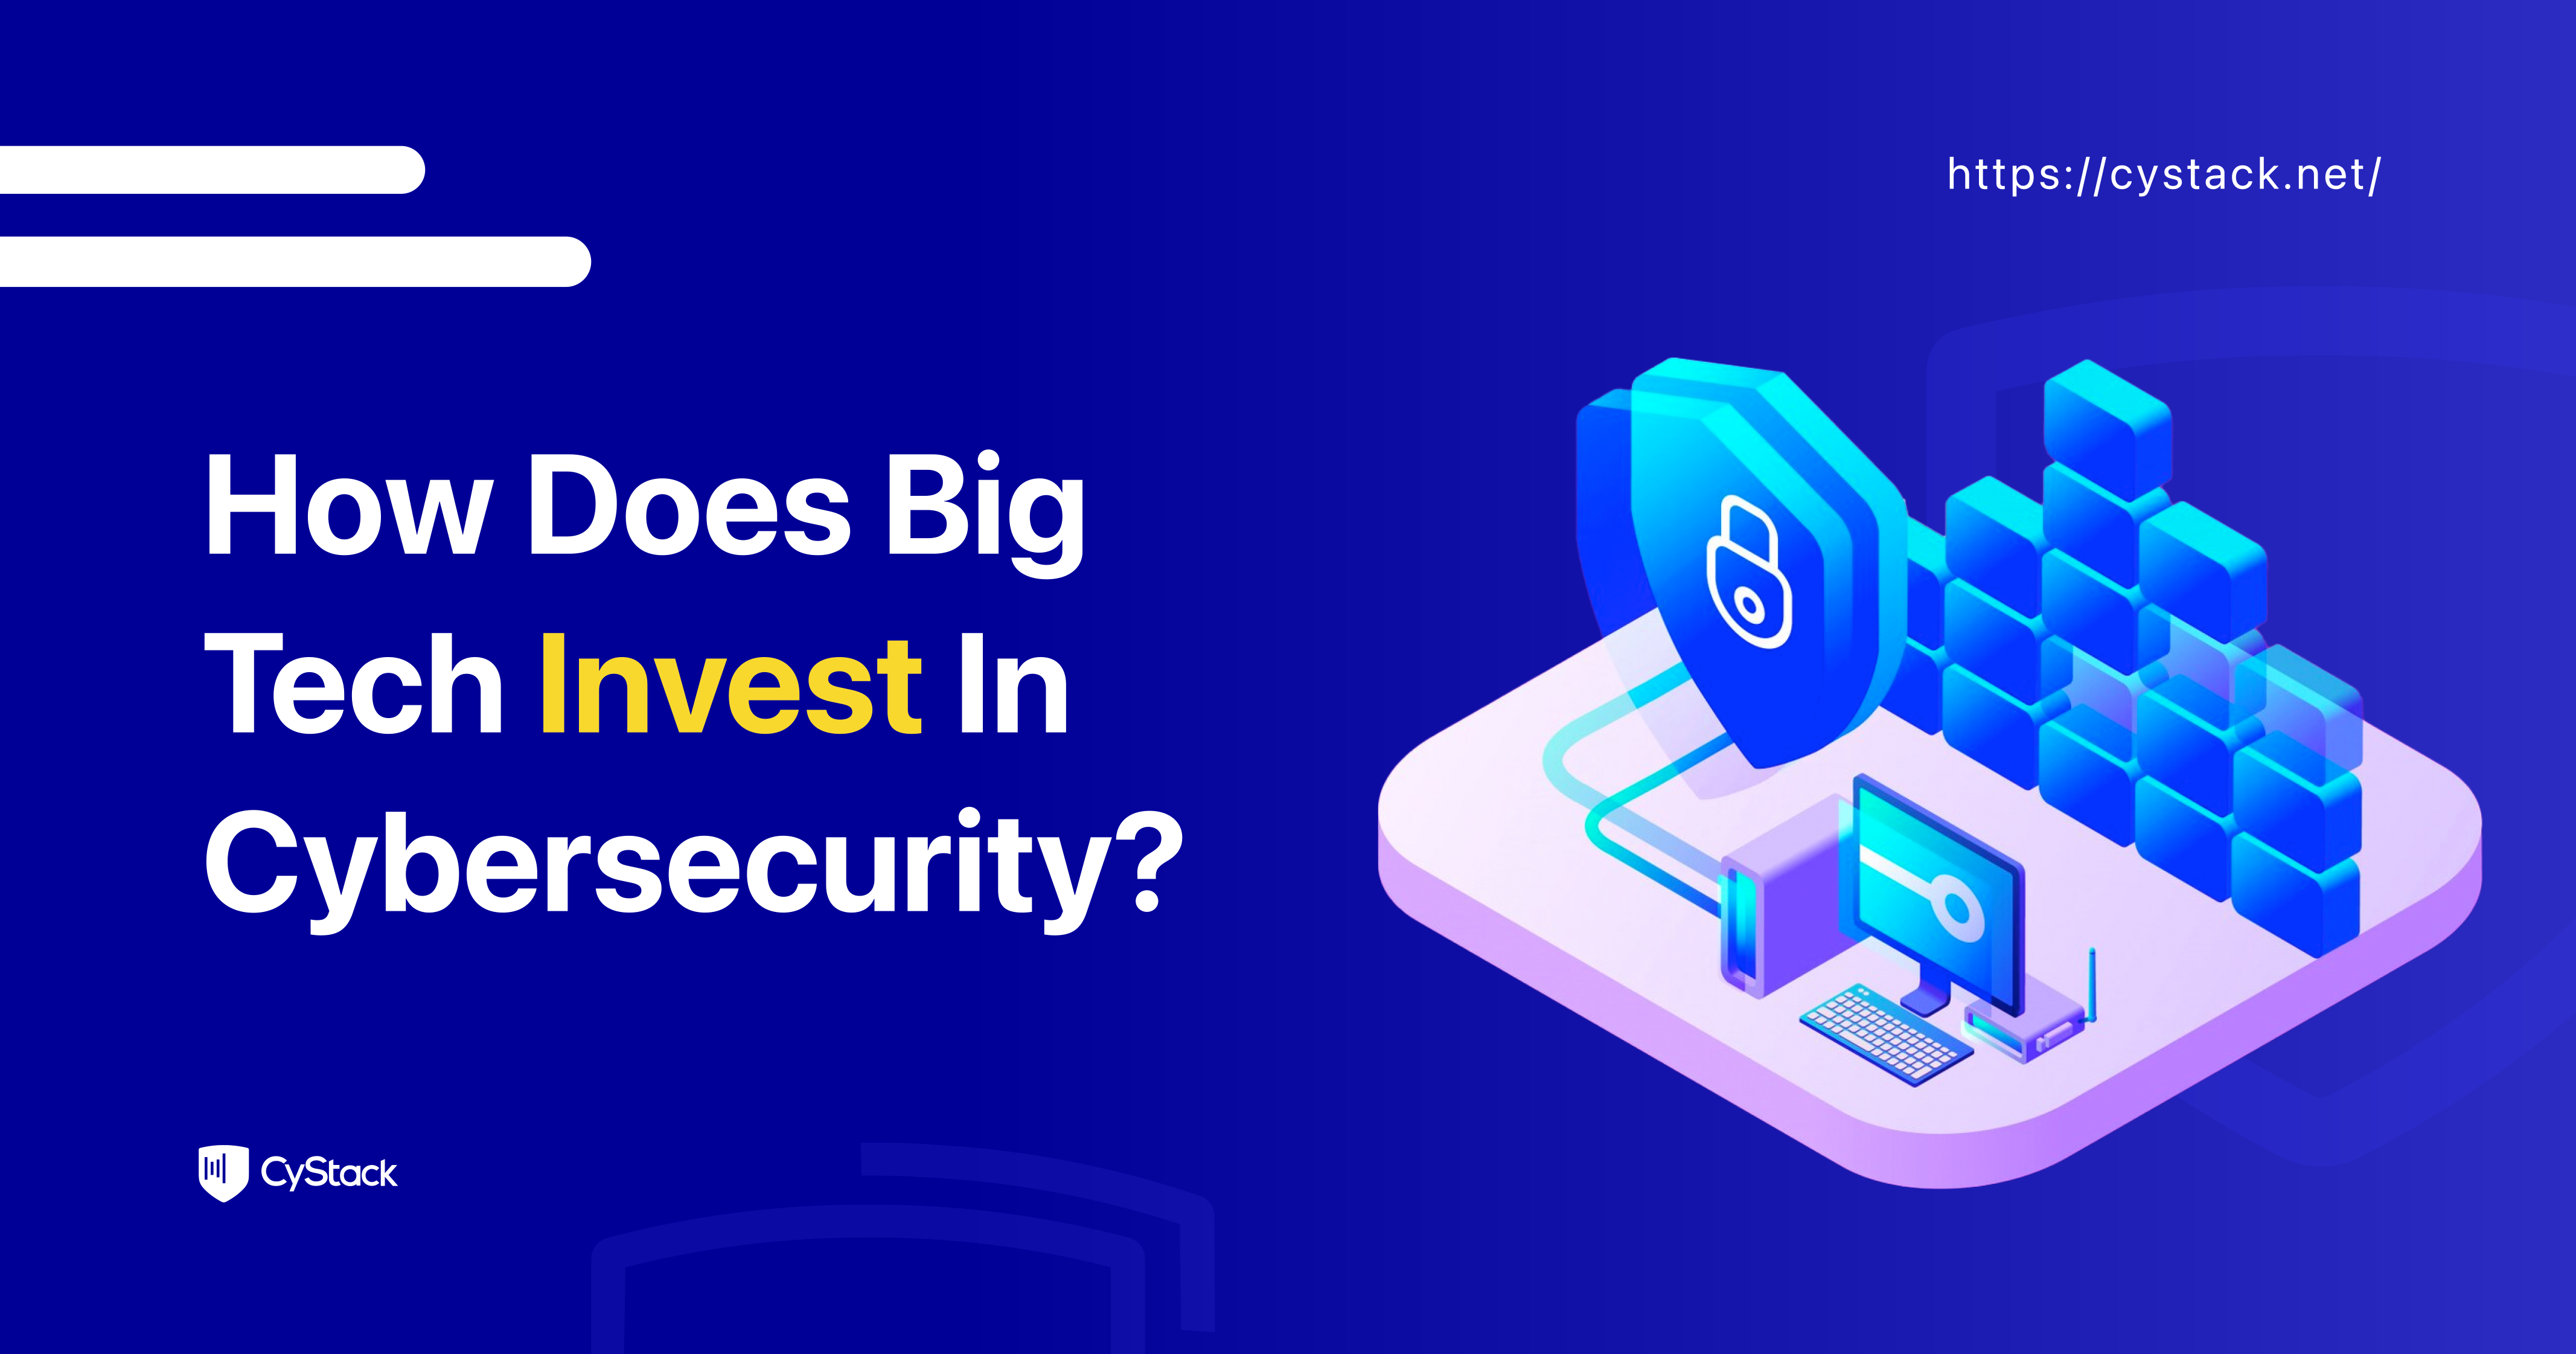 How Does Big Tech Invest In Cybersecurity?